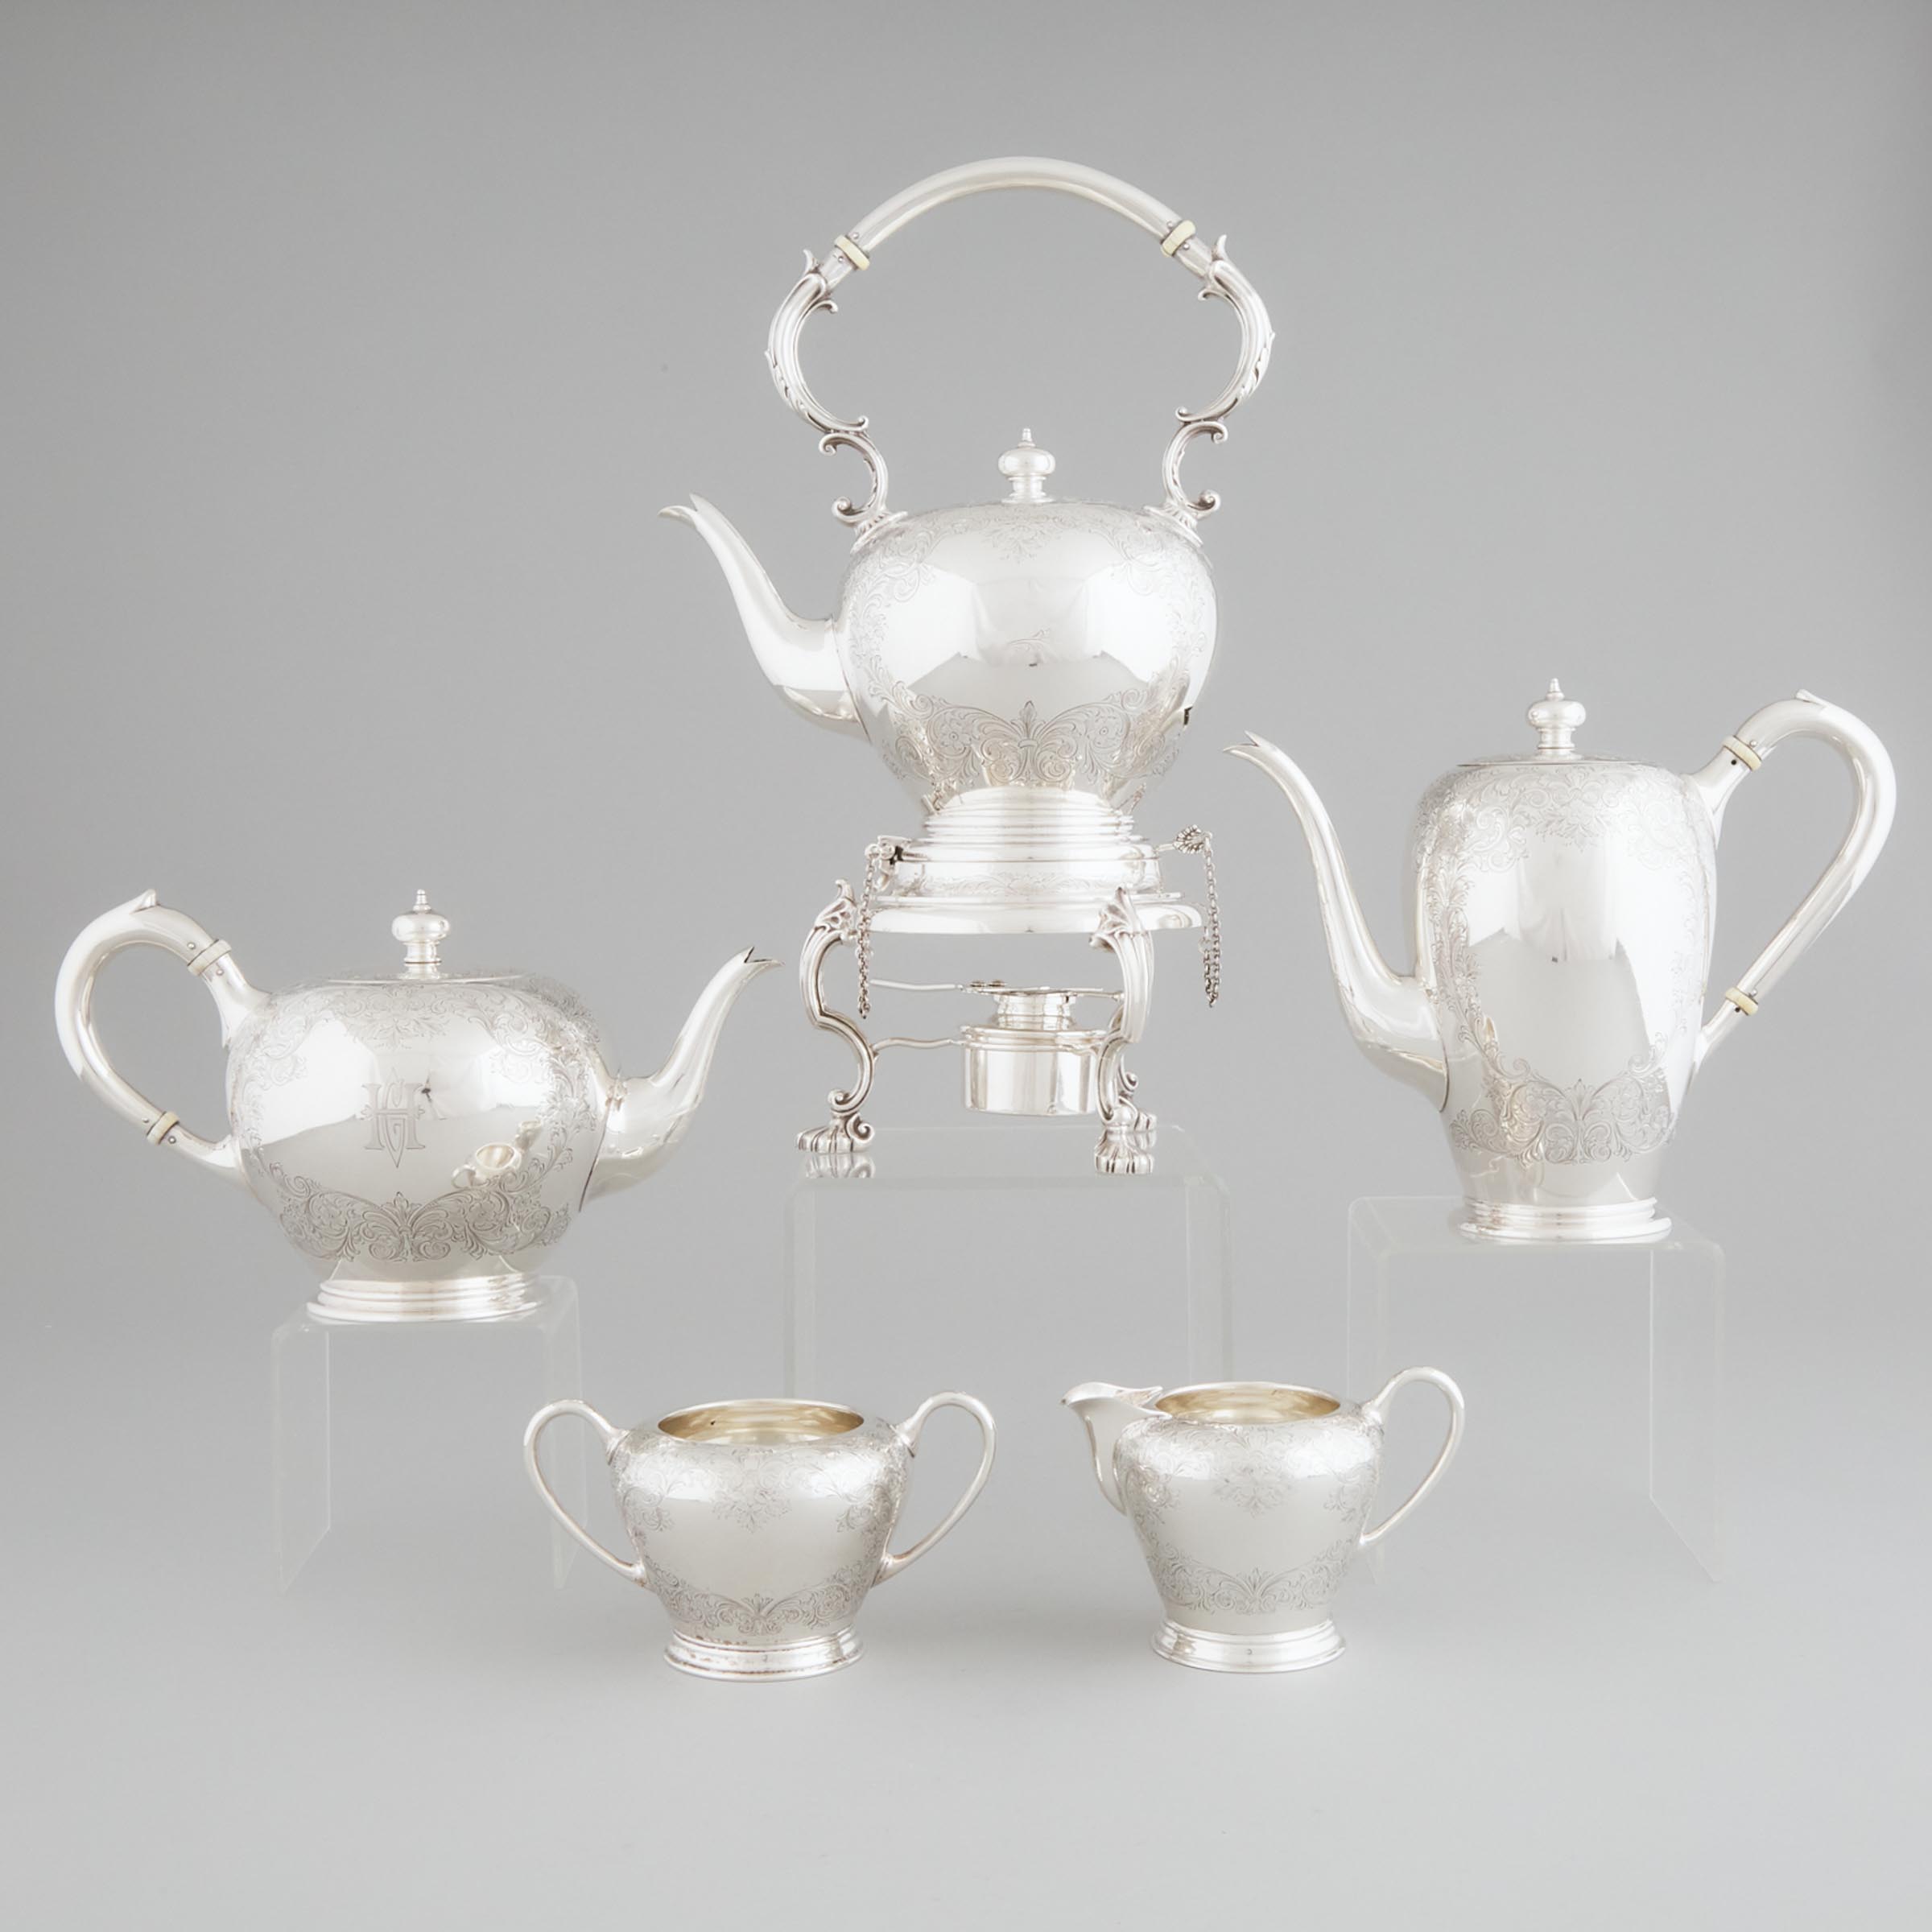 Canadian Silver Tea and Coffee Service, Henry Birks & Sons, Montreal, Que. 1929-34